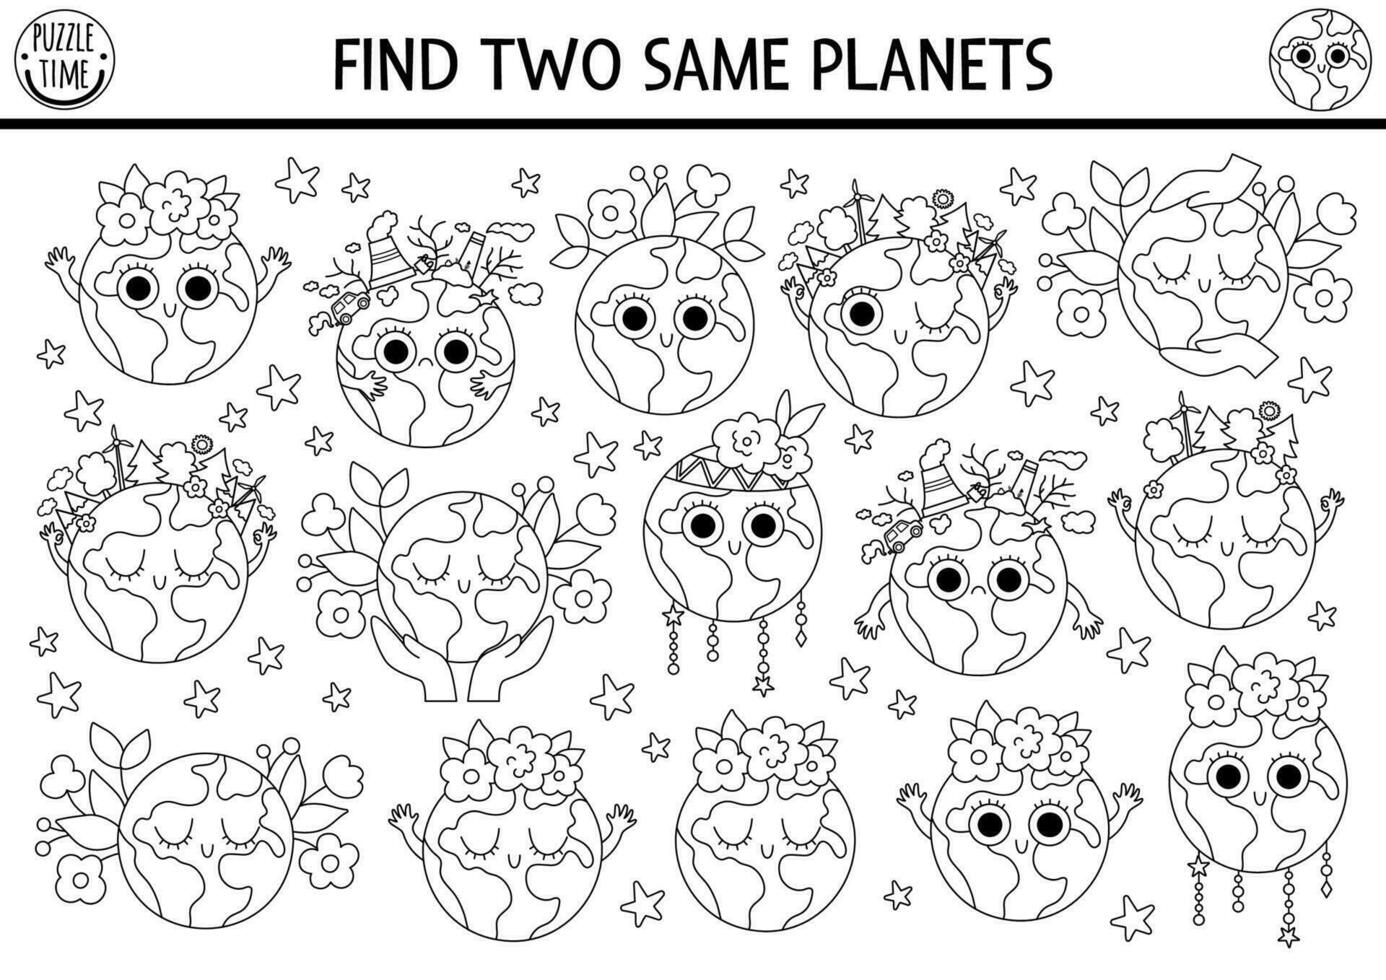 Find two same planets. Ecological black and white matching activity for children. Eco awareness educational quiz worksheet for kids for attention skills. Earth day printable coloring page vector